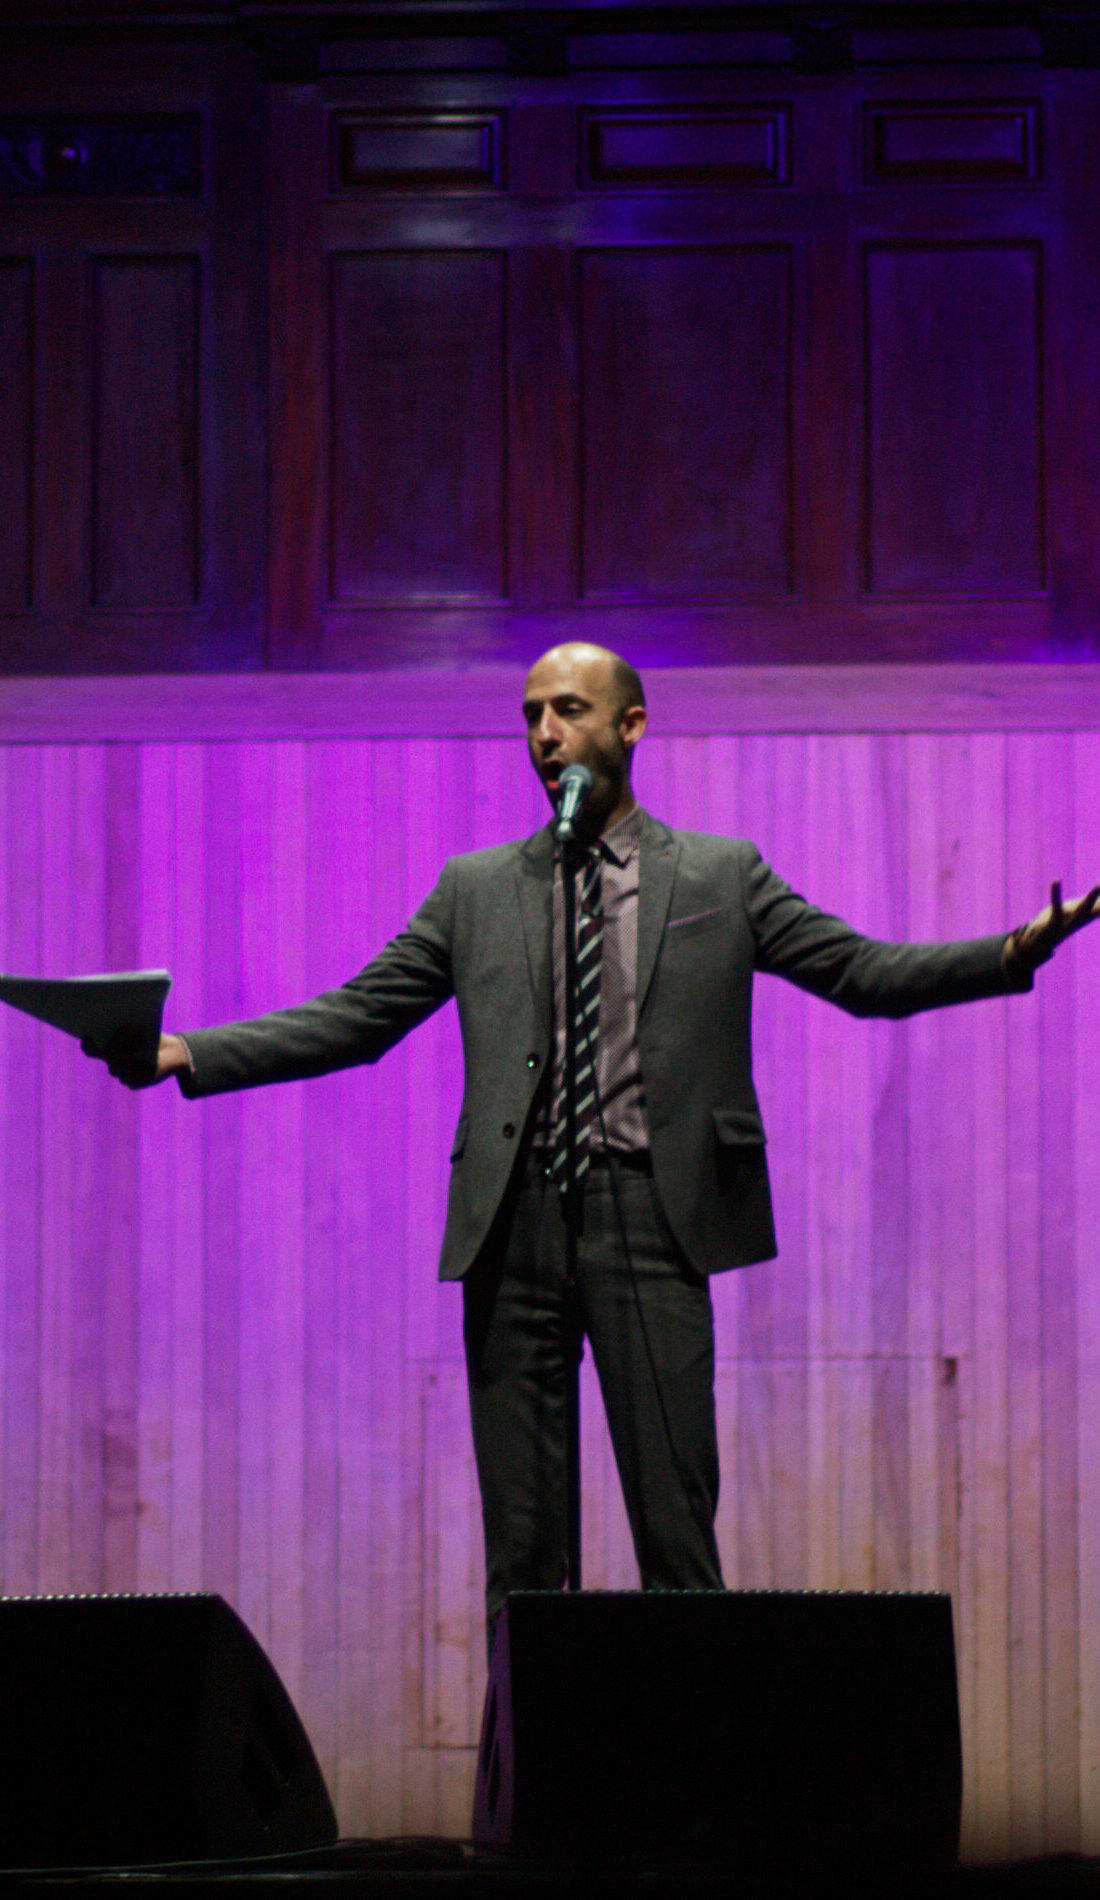 A Welcome To Night Vale live event